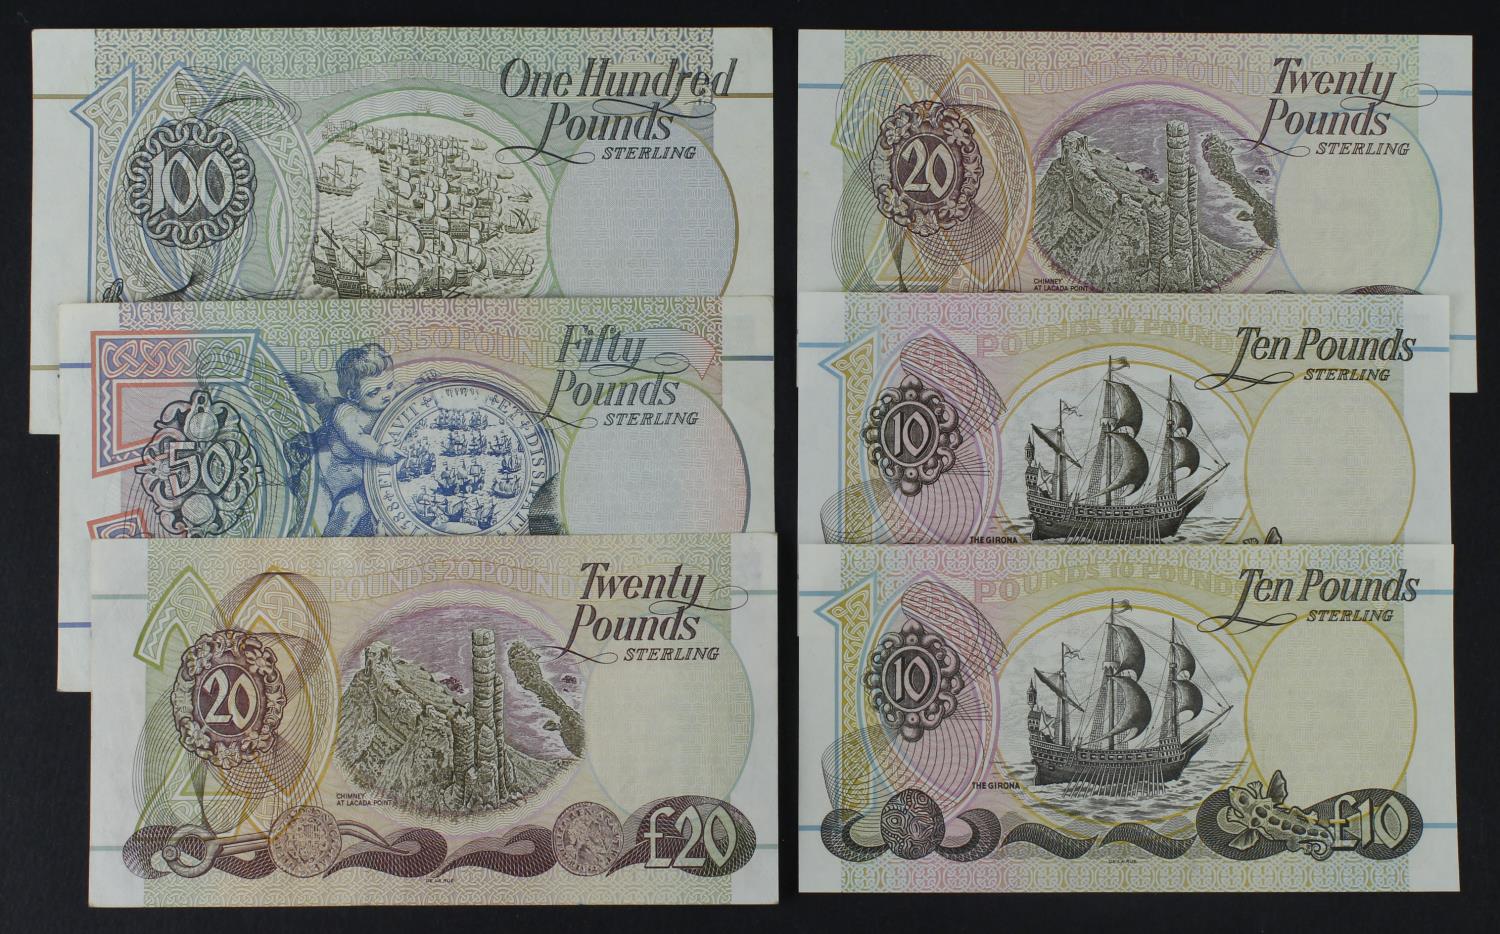 Northern Ireland, First Trust Bank (6), 100 Pounds, 50 Pounds and 10 Pounds dated 1st January - Image 2 of 2